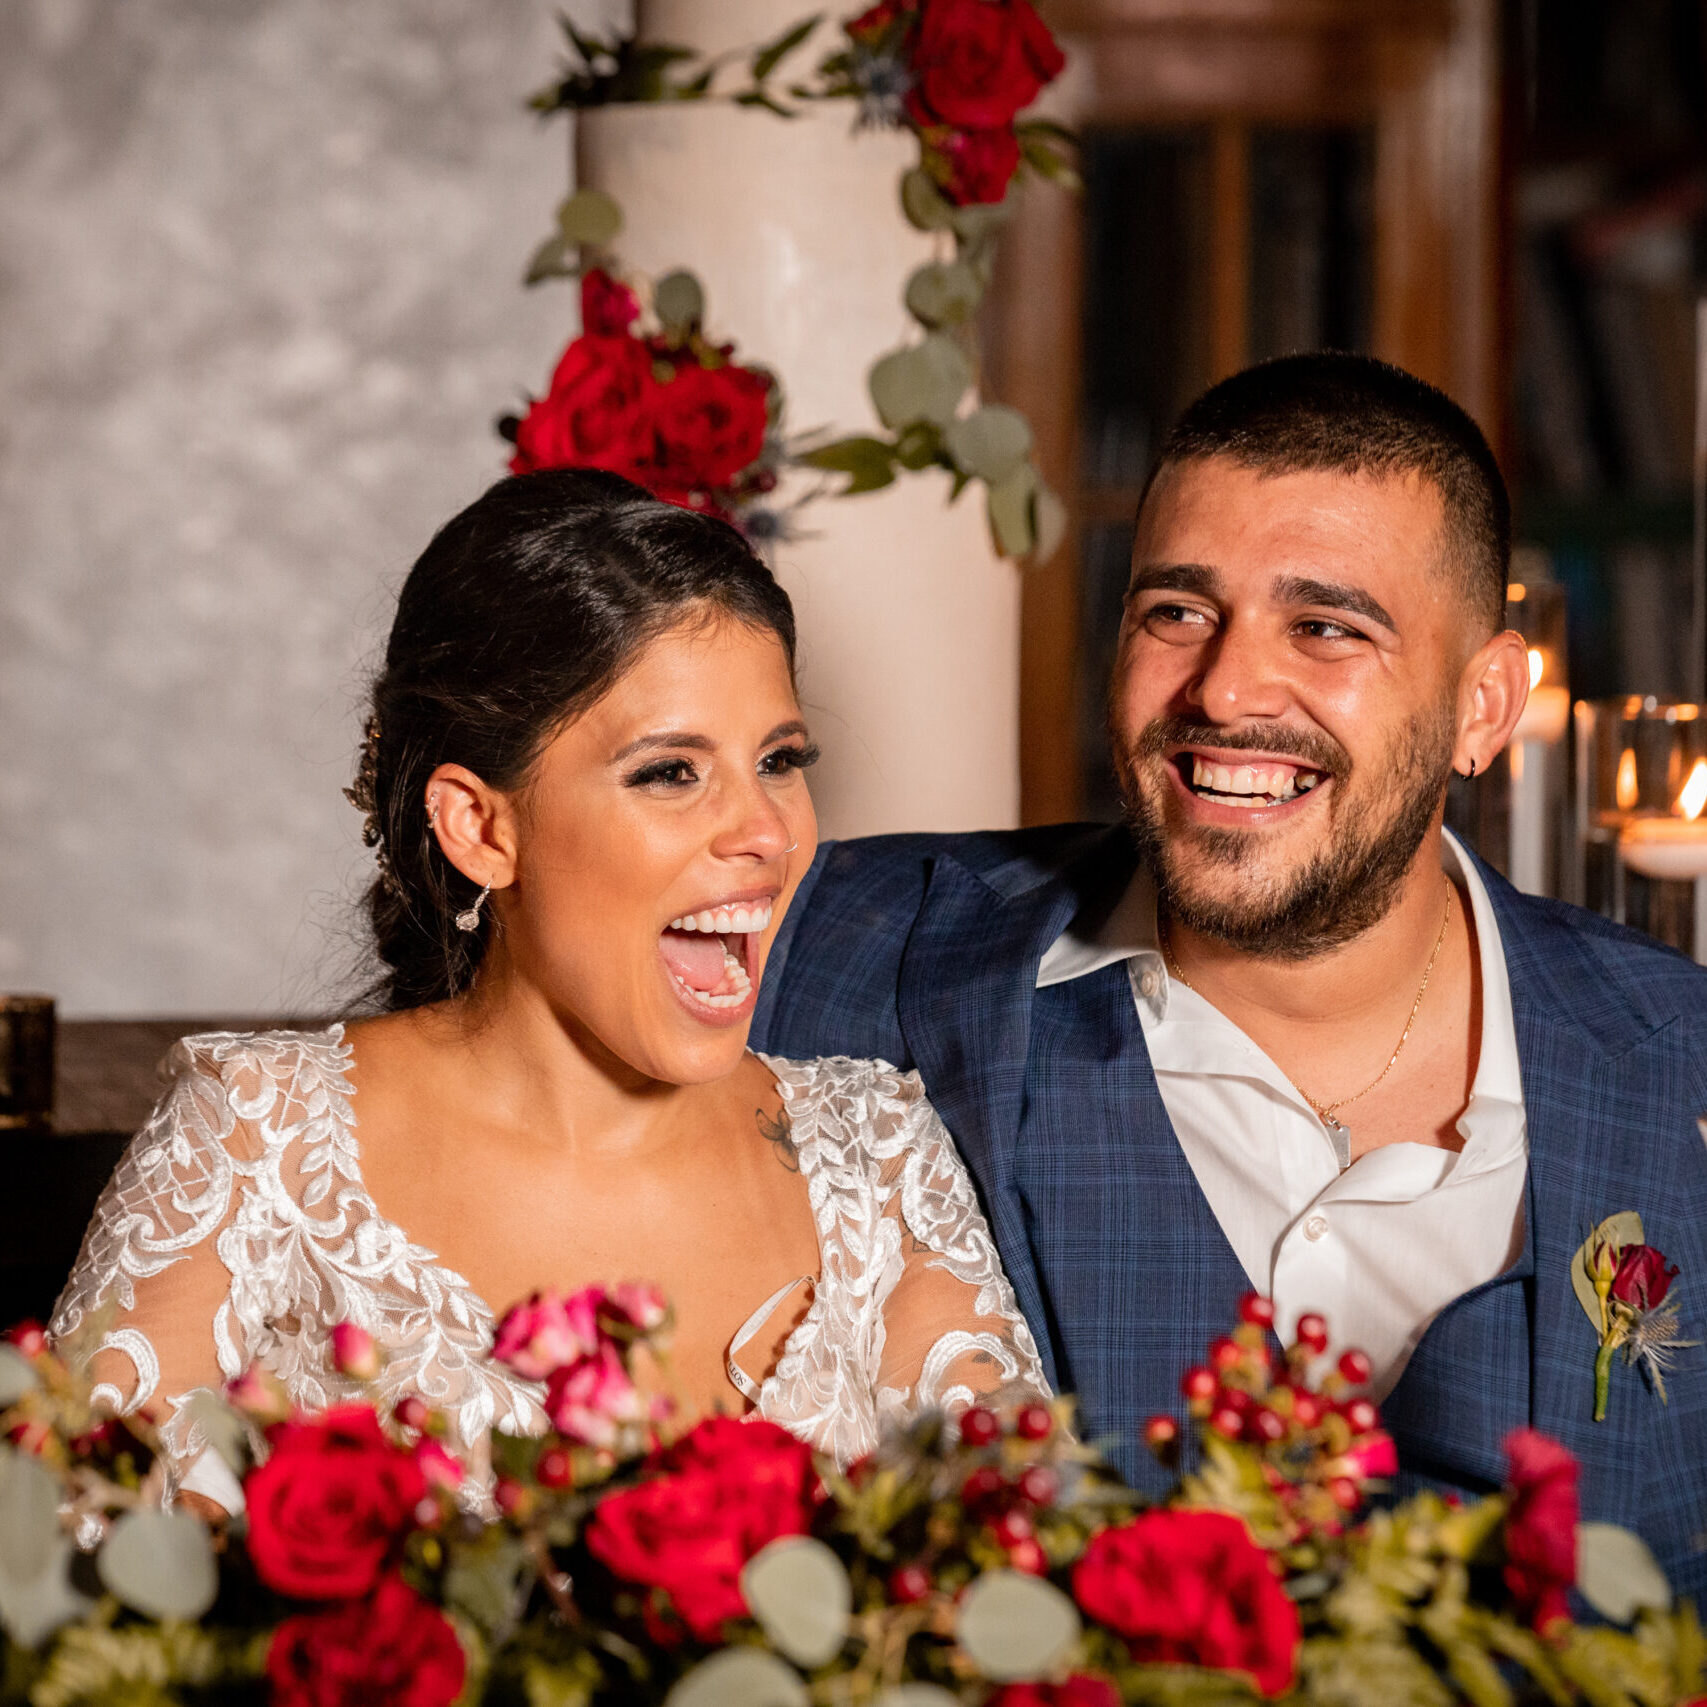 Nicole and Bryan's Wedding Planned by Deliris Ramos